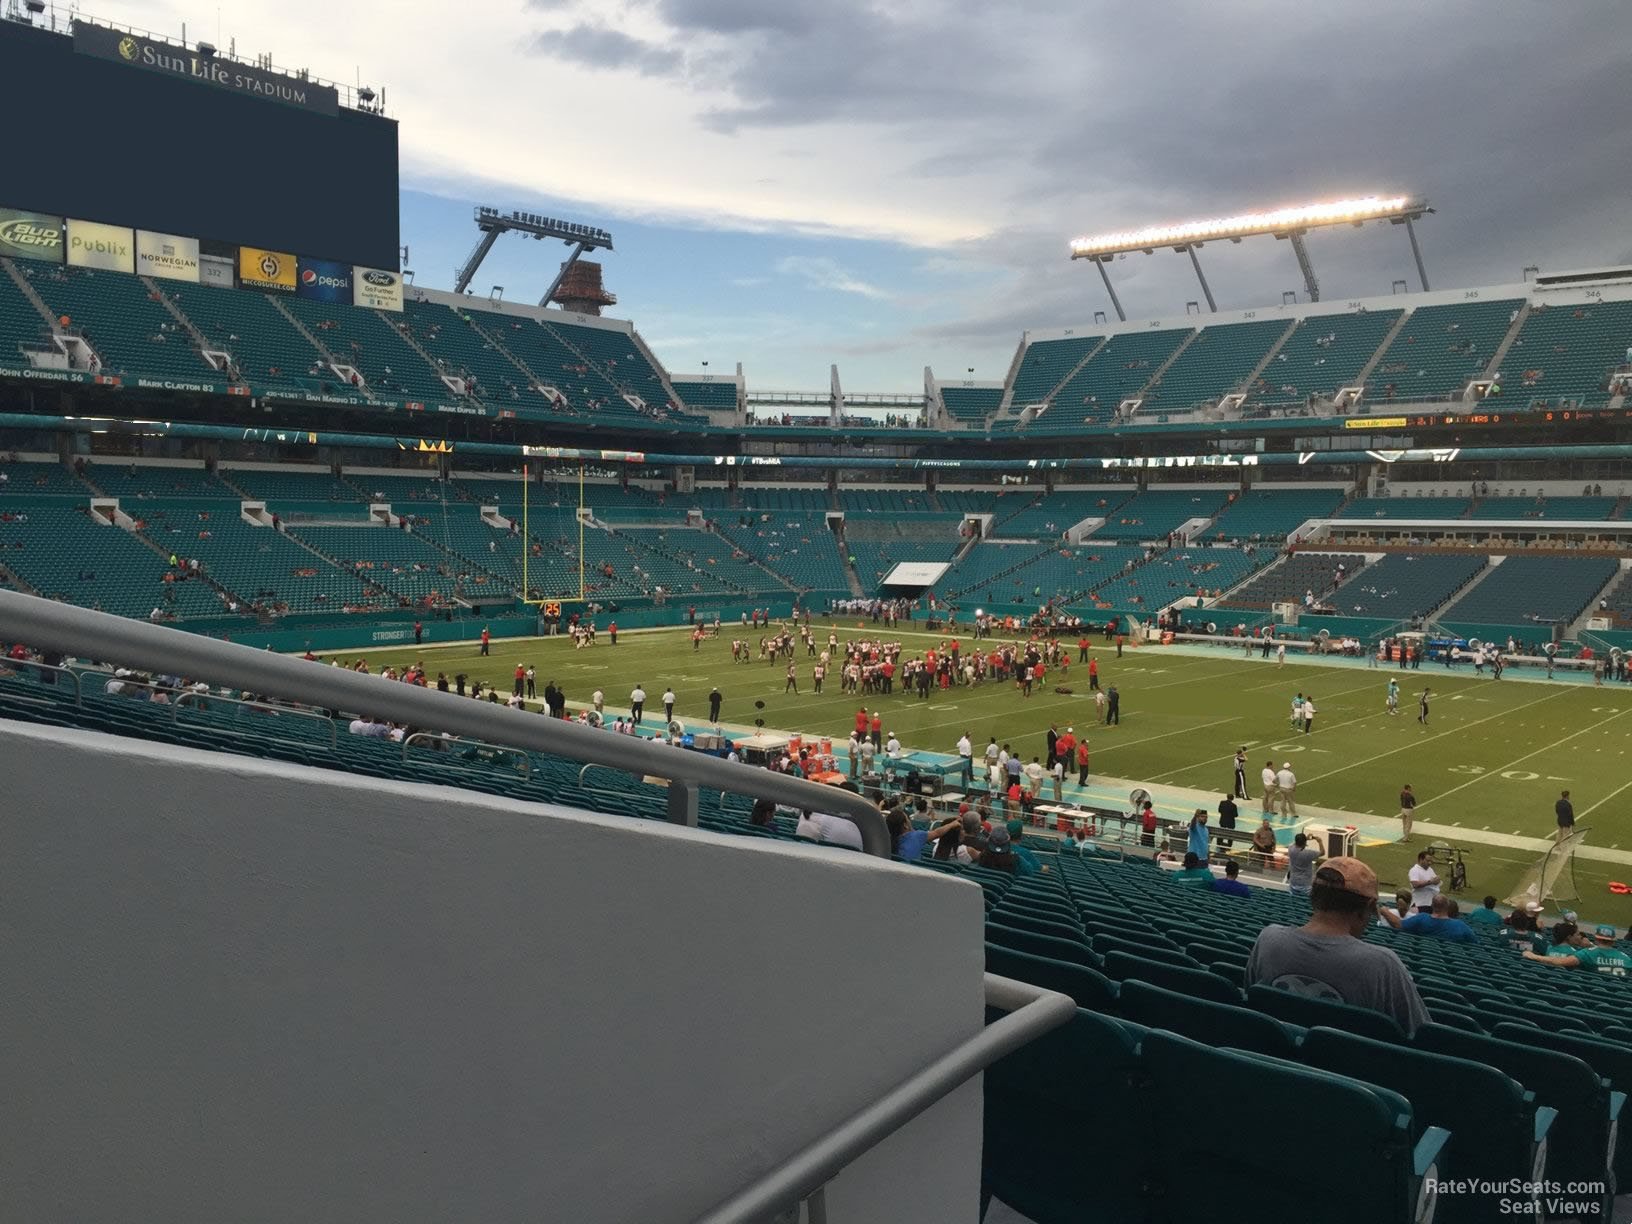 NFL Dolphins Tickets SEC 115 ROW 13 SEATS 7-10 for Sale in